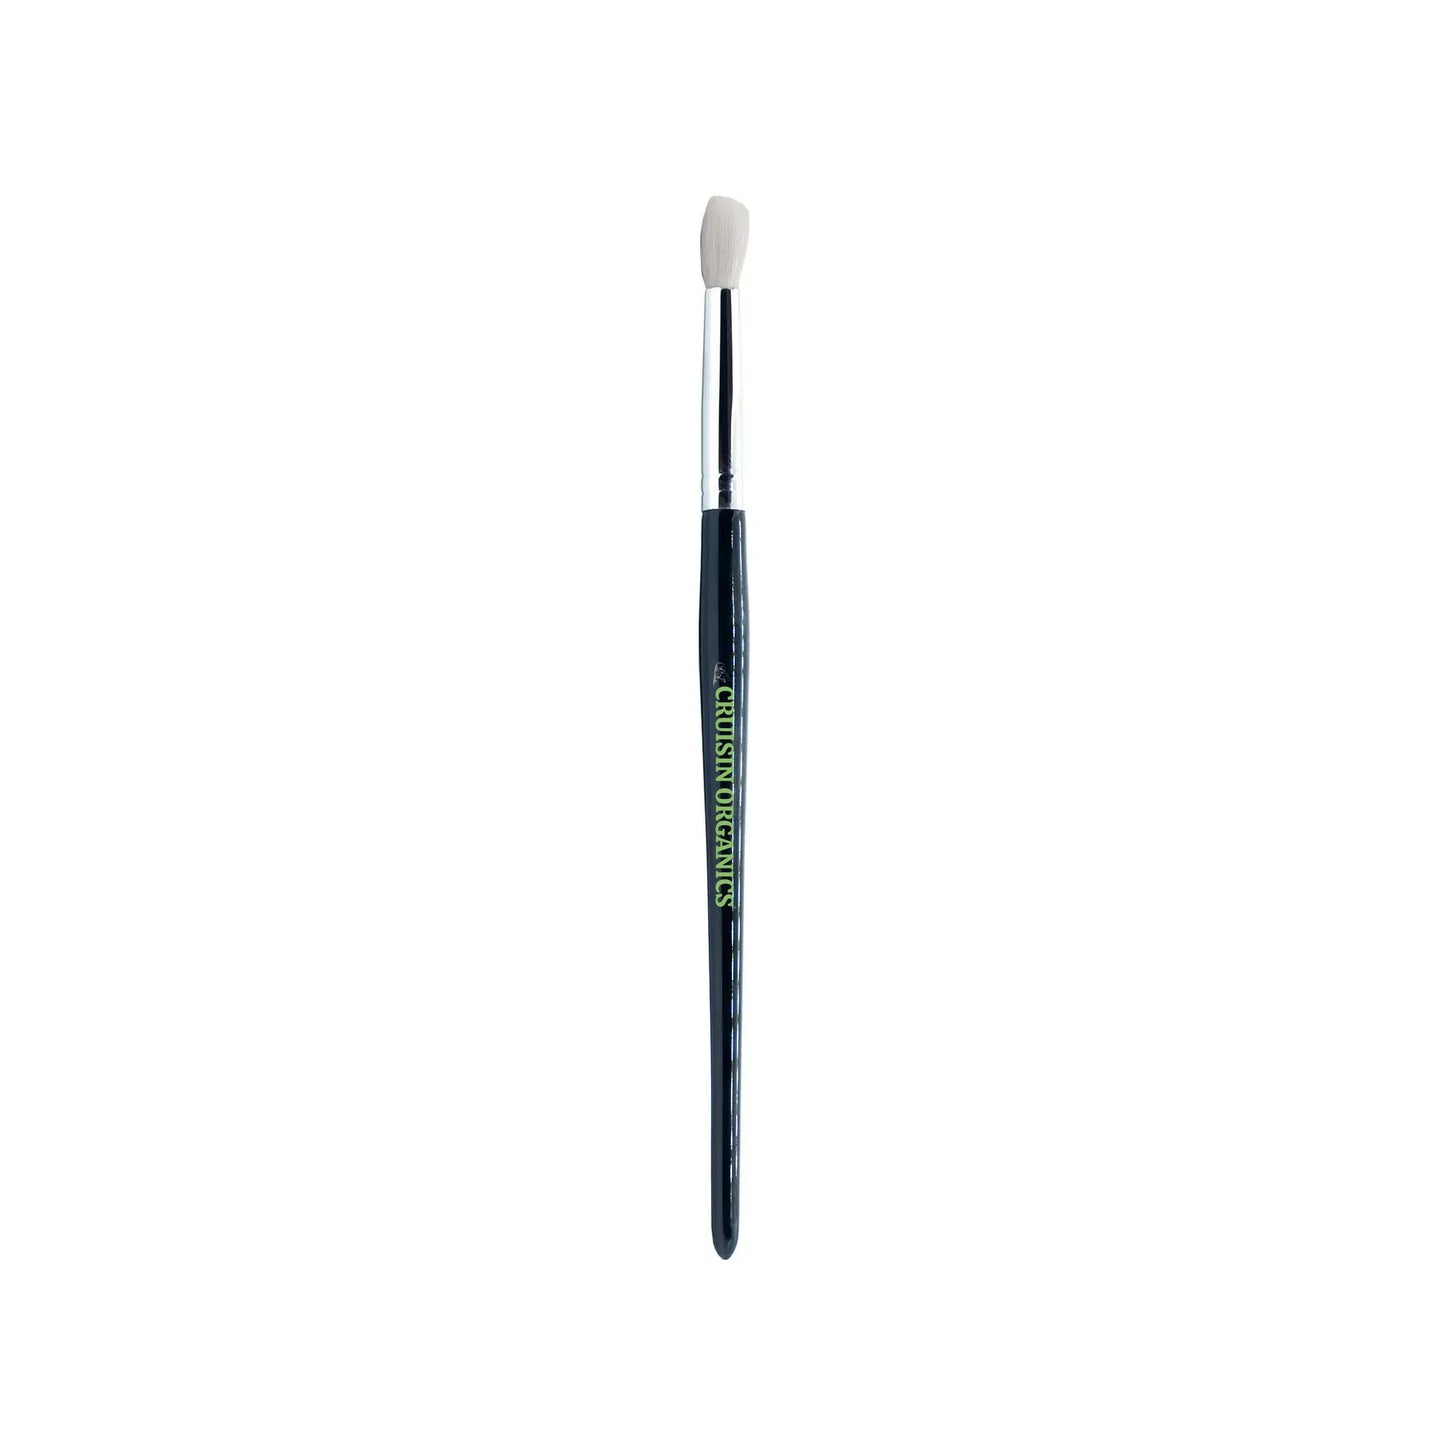 Looking for the right blending brush? The Cruisin Organics tapered blender is designed to seamlessly blend around the eye area. It’s perfect for softening intensities of eyeshadows if you want to blend out your makeup look, or use this brush to apply highlight to the brow bone. With natural goat hair, you’ll see a difference when you blend out powders with this high-quality brush!